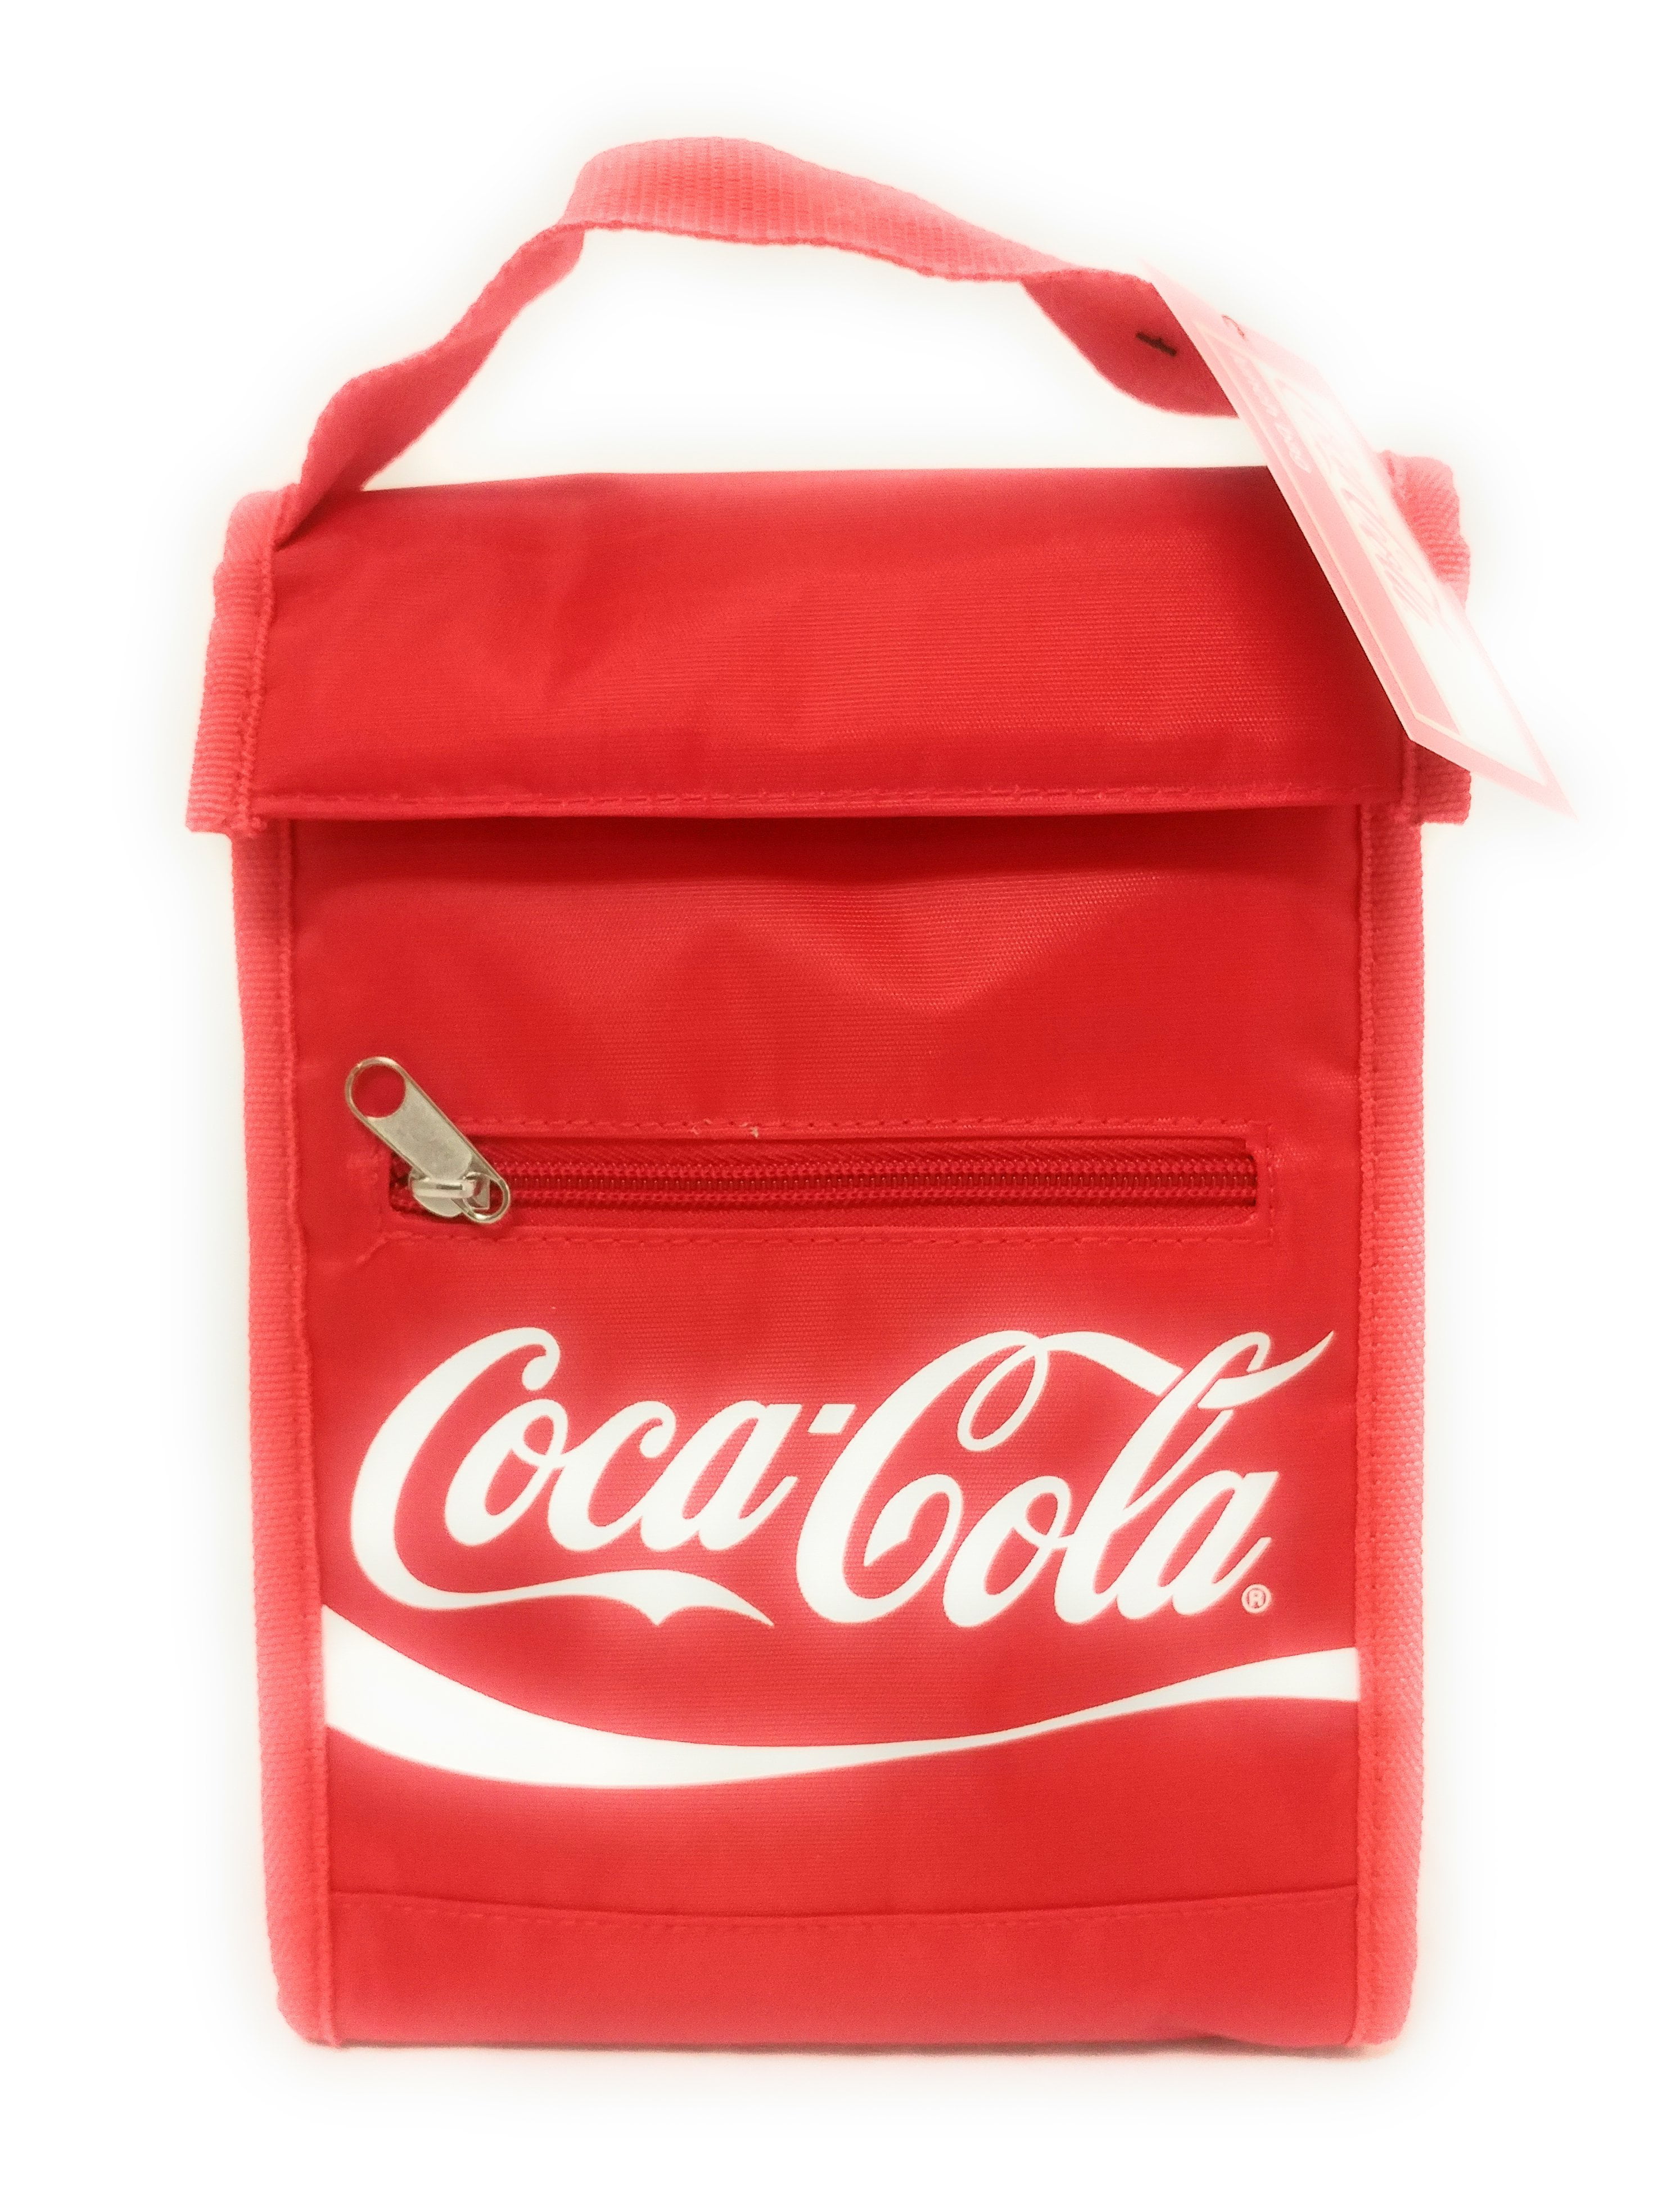 Coca-Cola Lunch Bag Cooler with Handle Coke Insulated Sack Tote ...